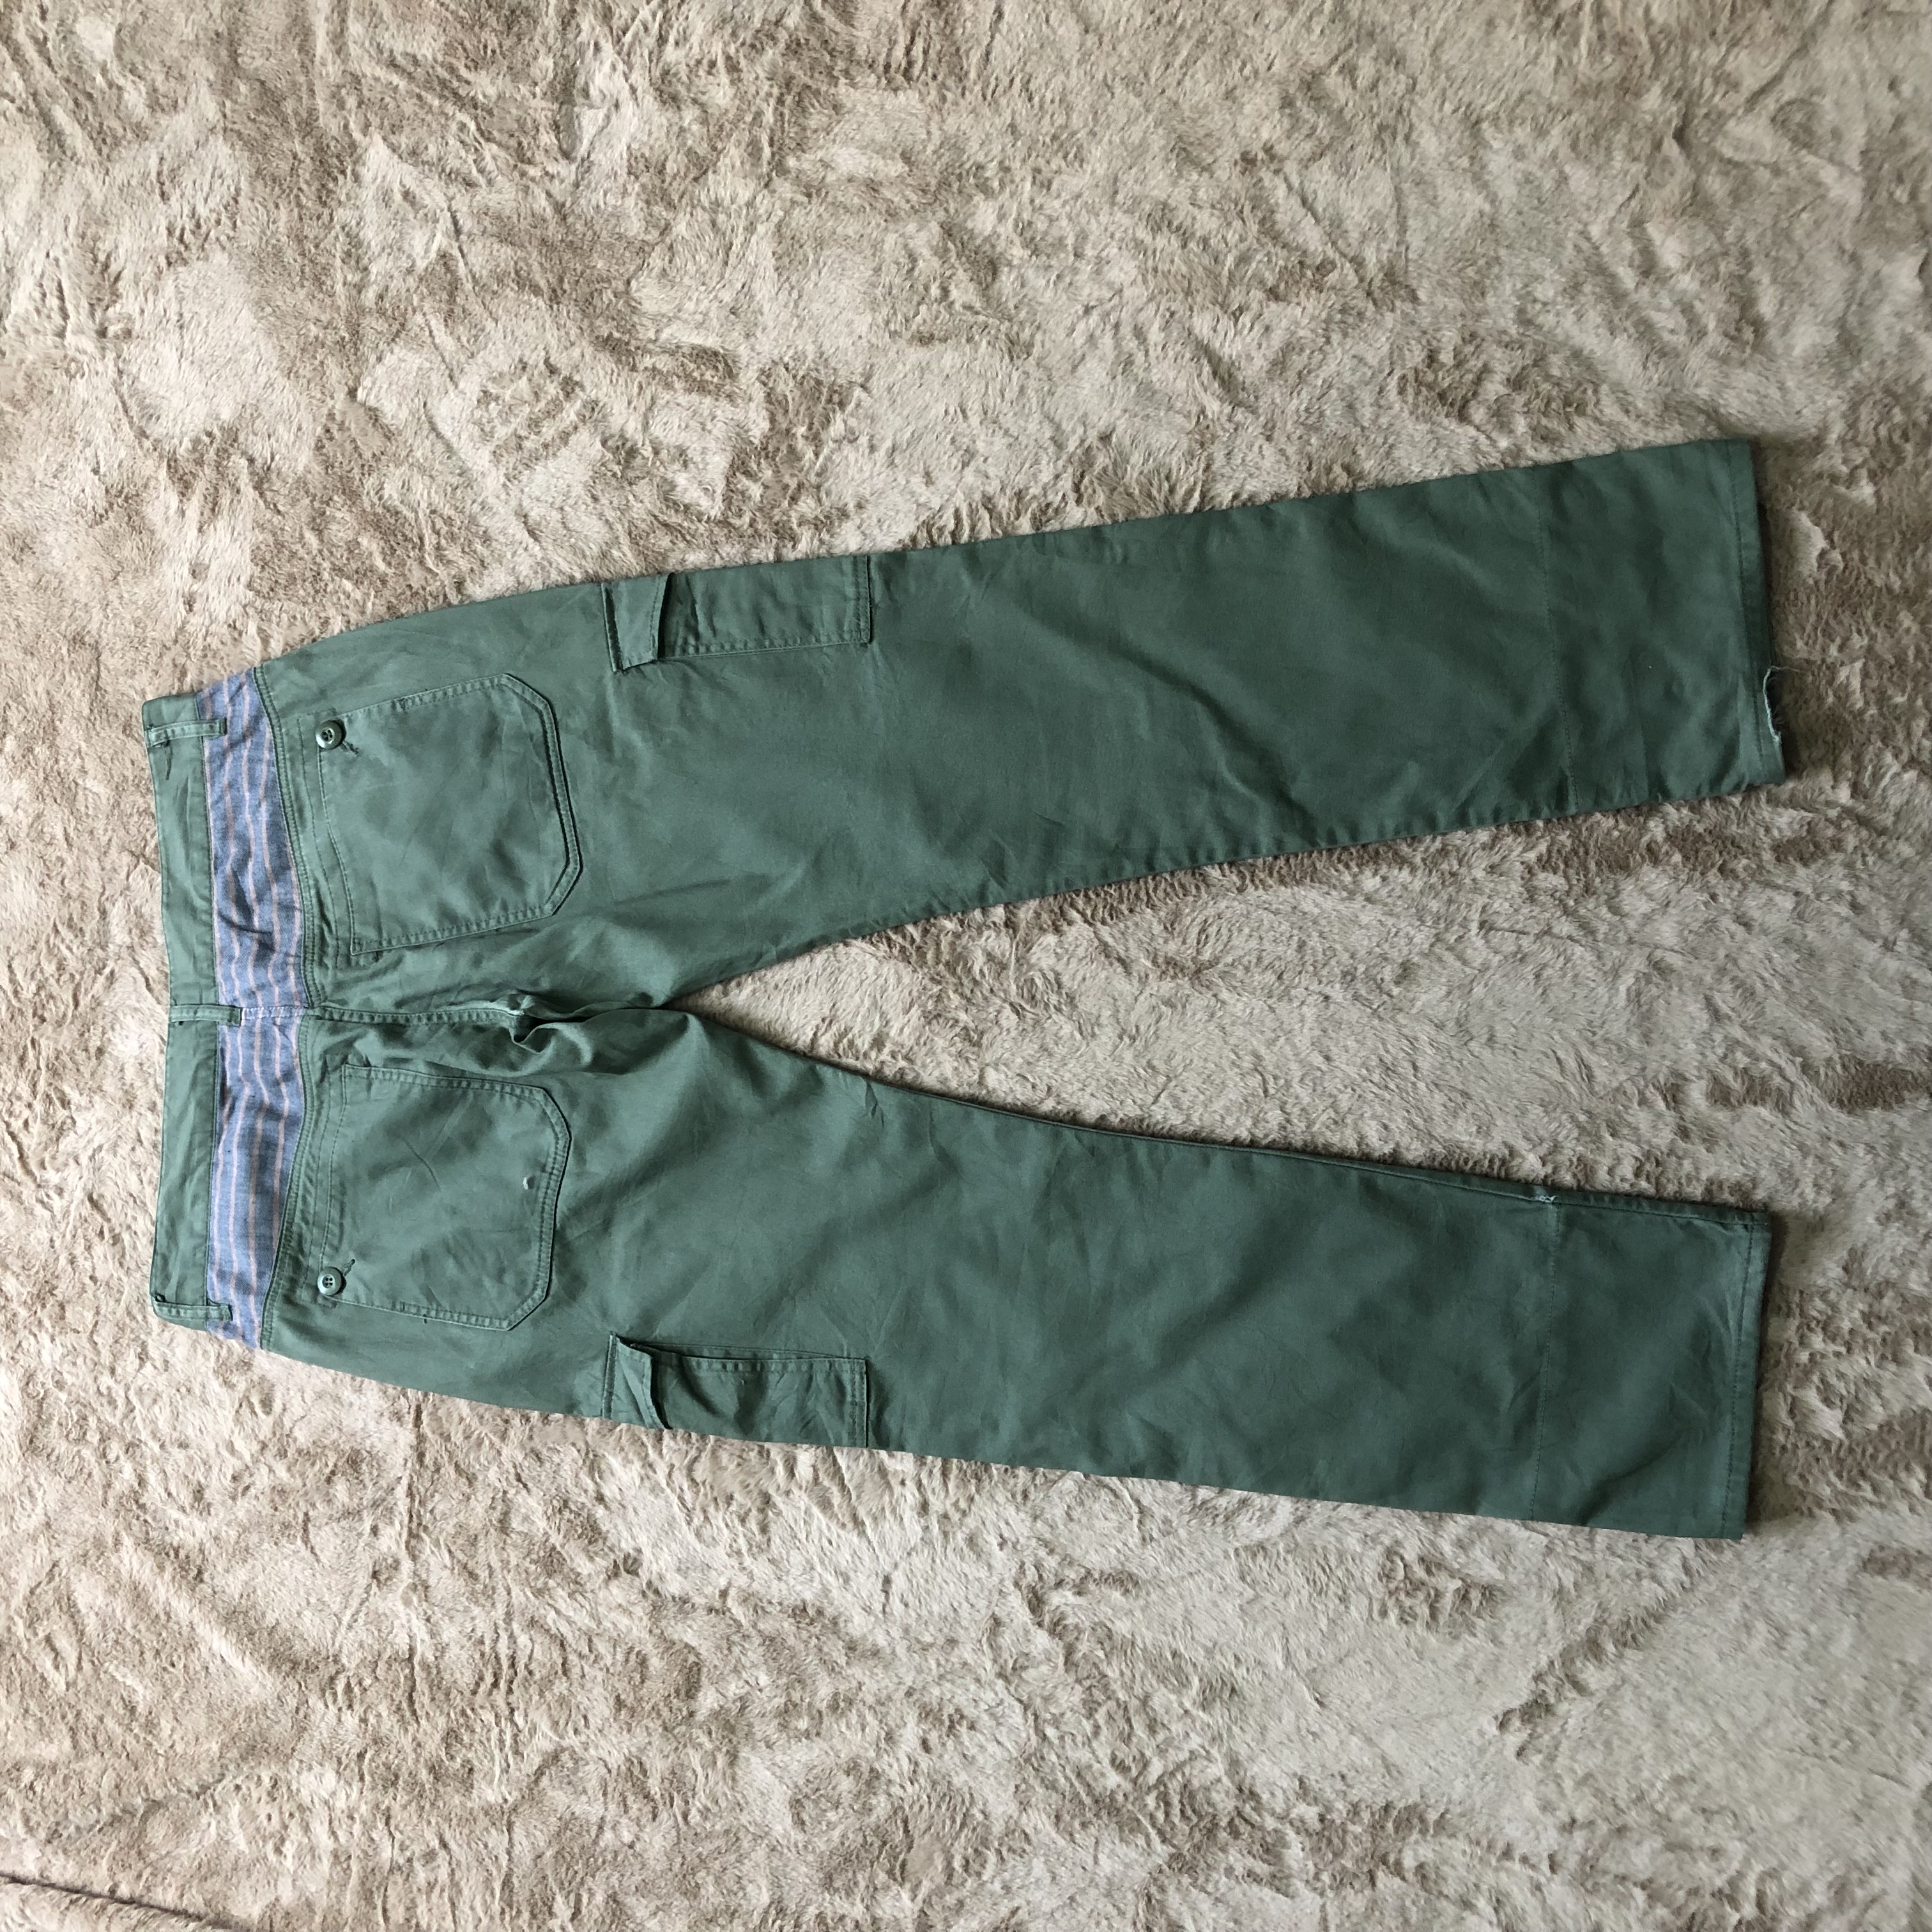 Japanese Brand - Plus One Military Army Style Cargo Pants 6 Pocket #4289-149 - 10